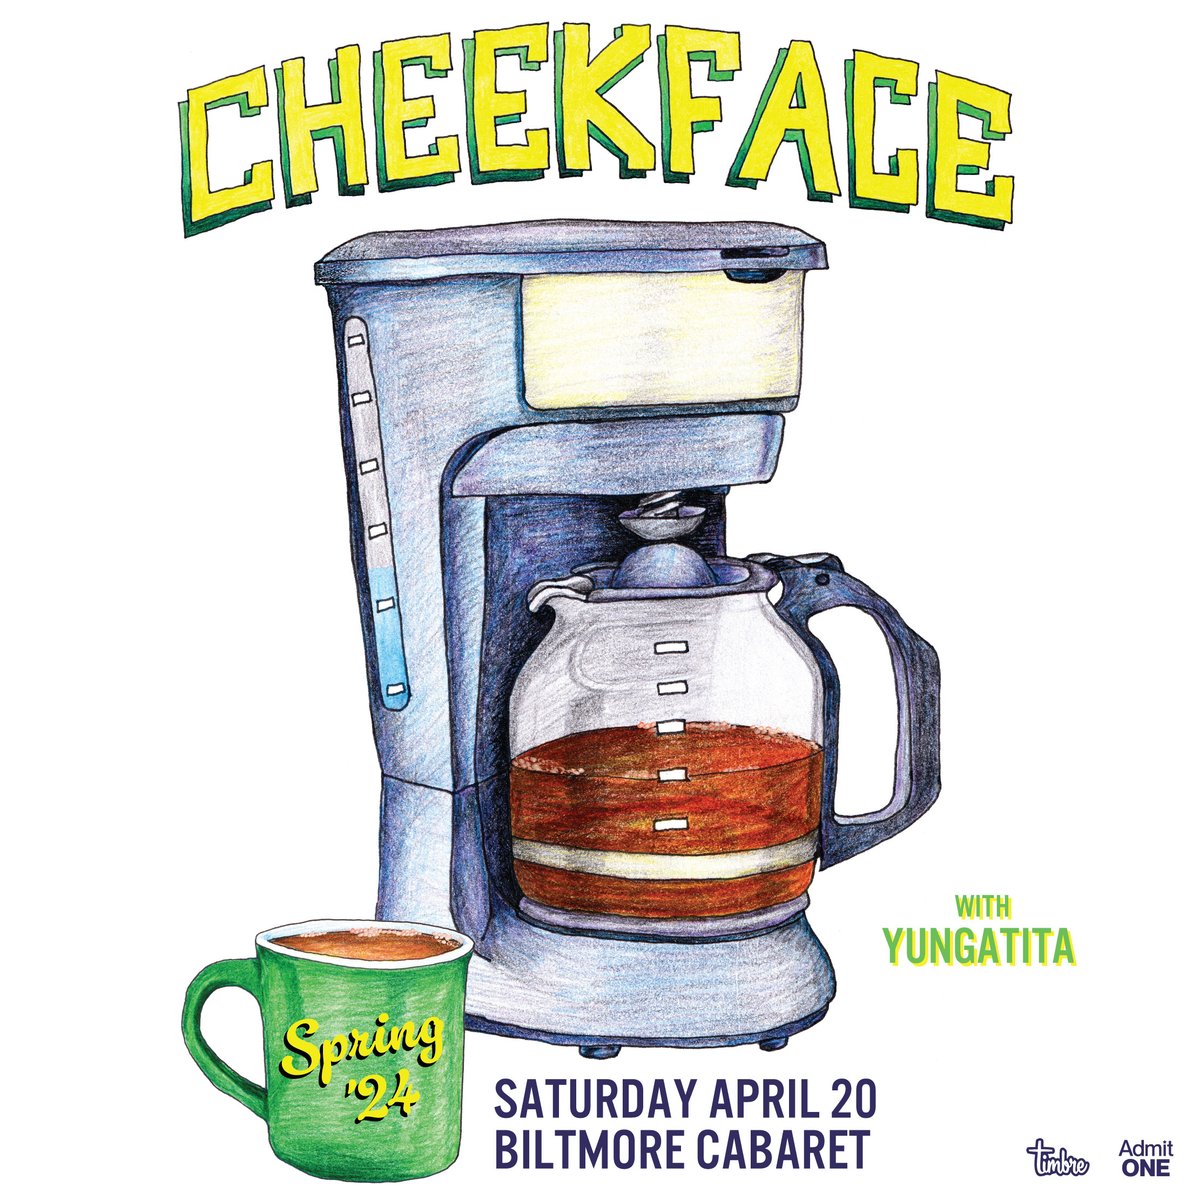 This Saturday in Vancouver! @cheekfaceREAL @biltmorecabaret with @YUNGATITA - Early Show: Doors 6:30pm. Get your tickets: admitone.com/events/cheekfa…